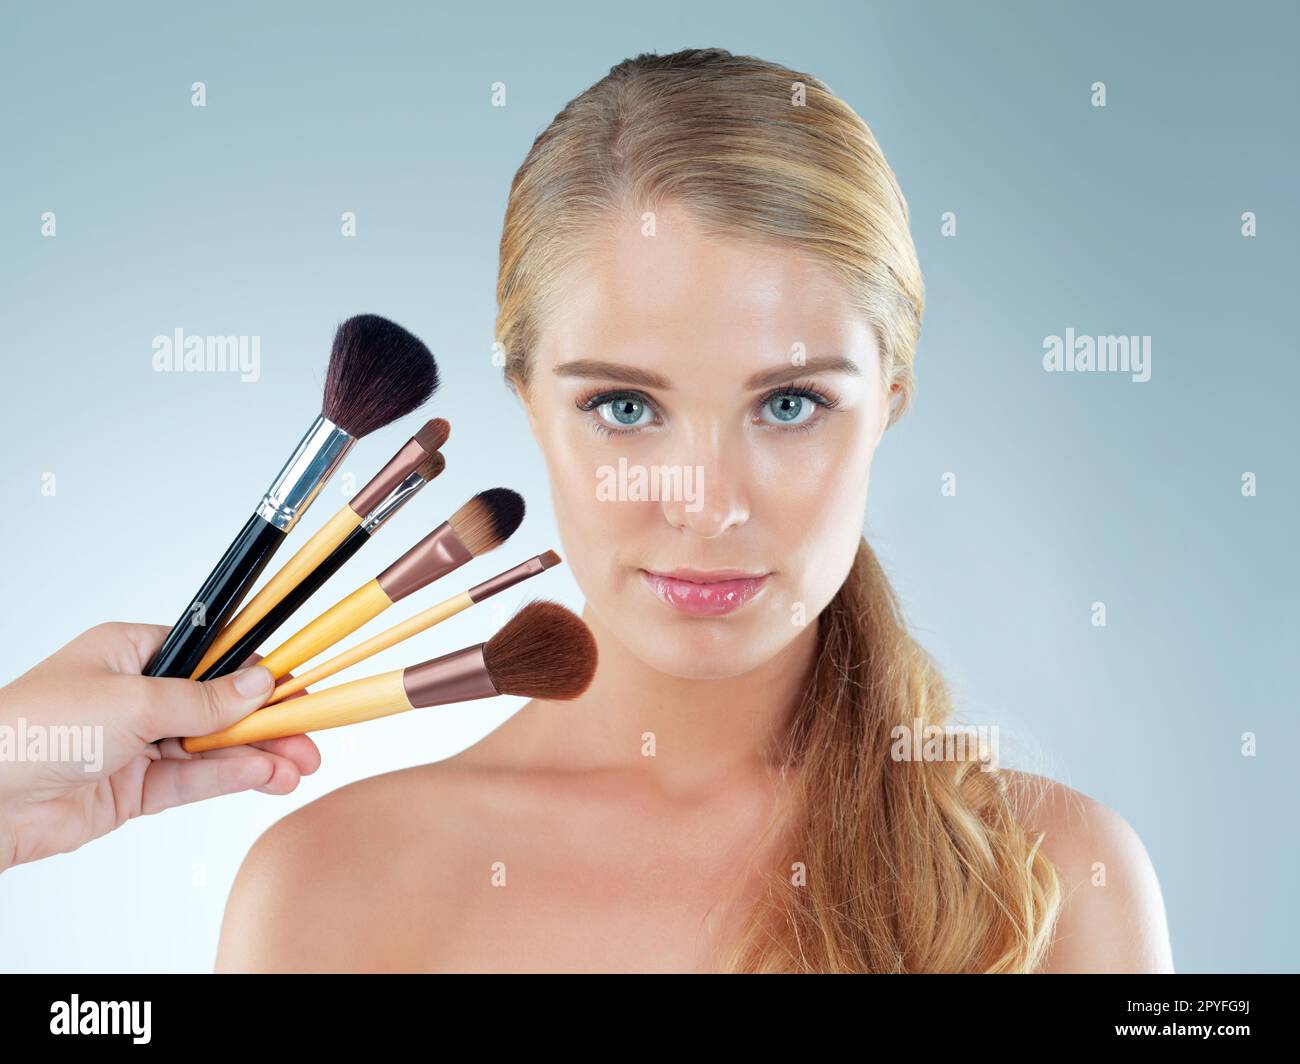 Every kind of brush for every kind of makeup. Studio portrait of a beautiful young woman posing with makeup brushes against a blue background. Stock Photo